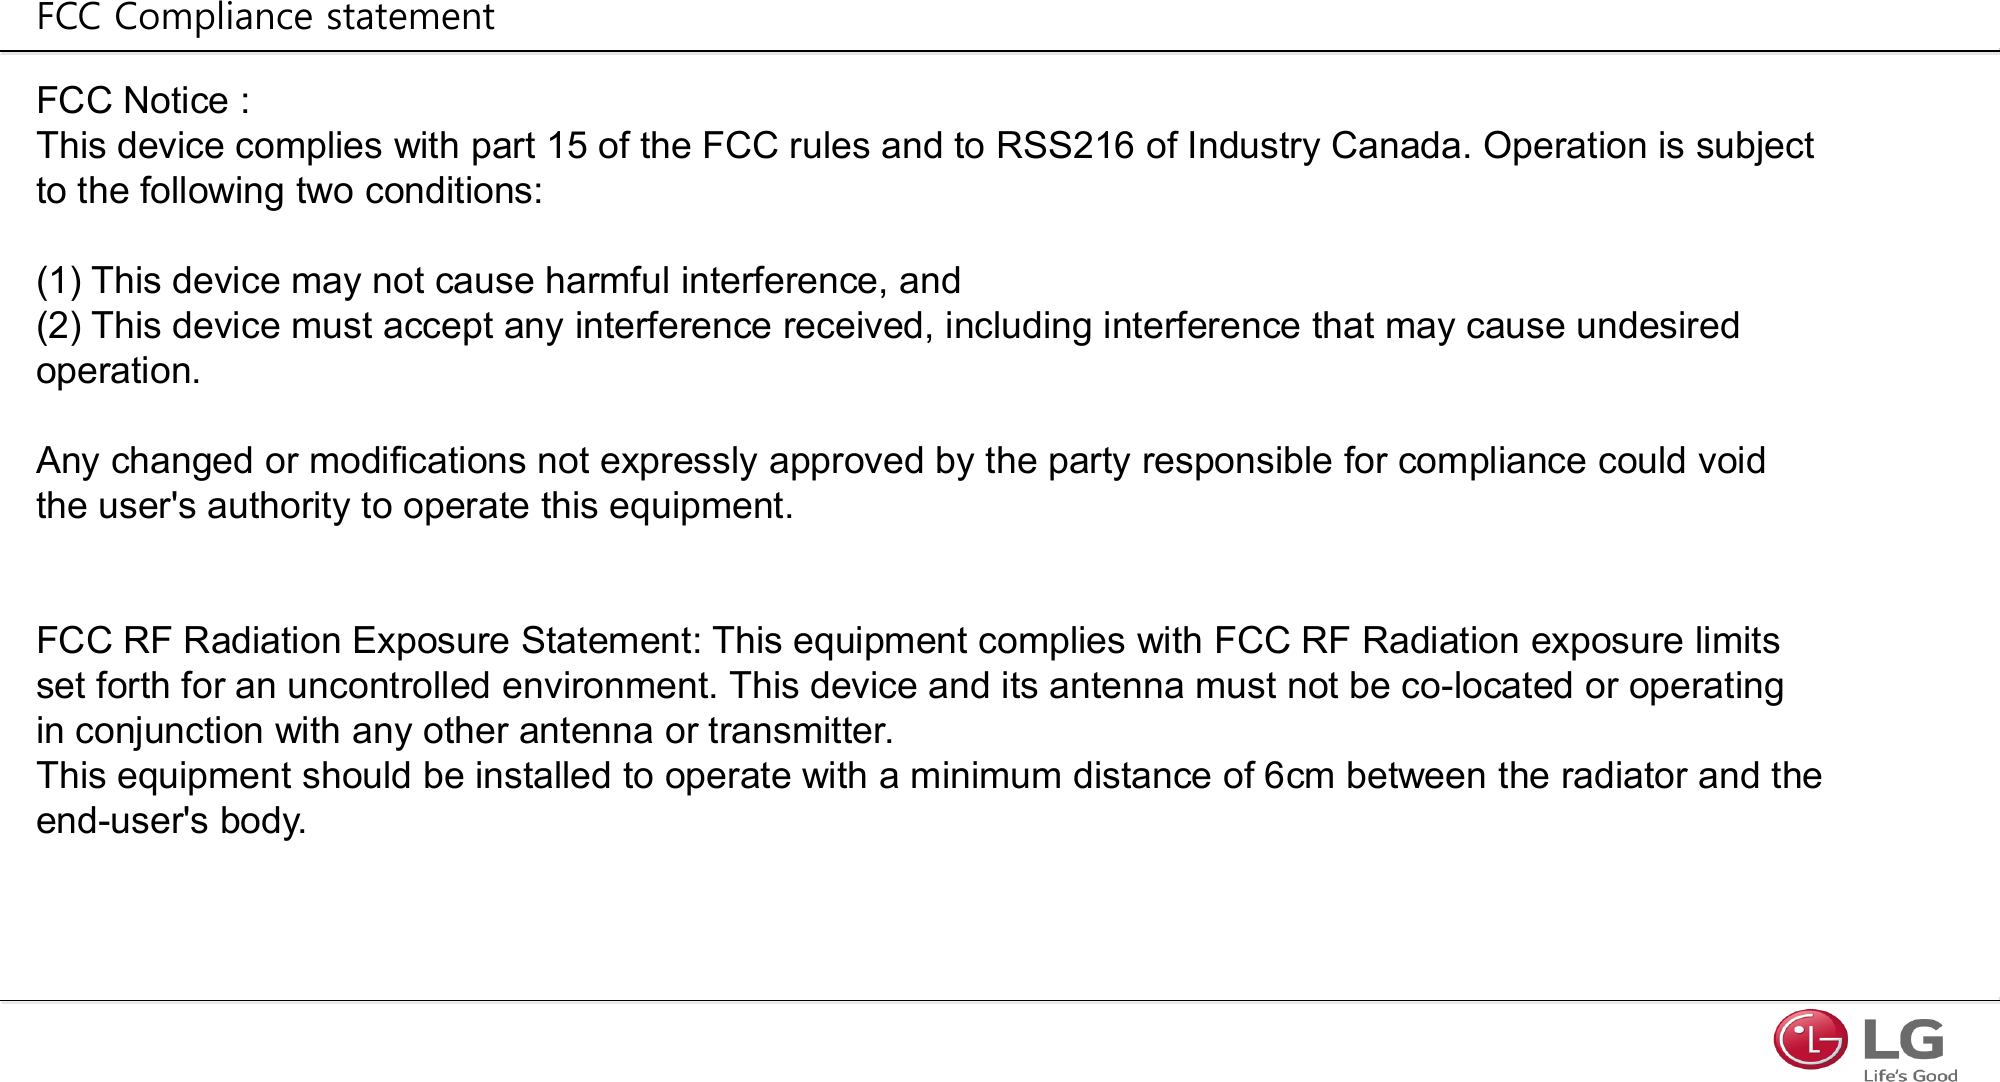 FCC Notice : This device complies with part 15 of the FCC rules and to RSS216 of Industry Canada. Operation is subject to the following two conditions:(1) This device may not cause harmful interference, and(2) This device must accept any interference received, including interference that may cause undesired operation.Any changed or modifications not expressly approved by the party responsible for compliance could void the user&apos;s authority to operate this equipment.FCC RF Radiation Exposure Statement: This equipment complies with FCC RF Radiation exposure limits set forth for an uncontrolled environment. This device and its antenna must not be co-located or operating in conjunction with any other antenna or transmitter.This equipment should be installed to operate with a minimum distance of 6cm between the radiator and the end-user&apos;s body.FCC Compliance statement